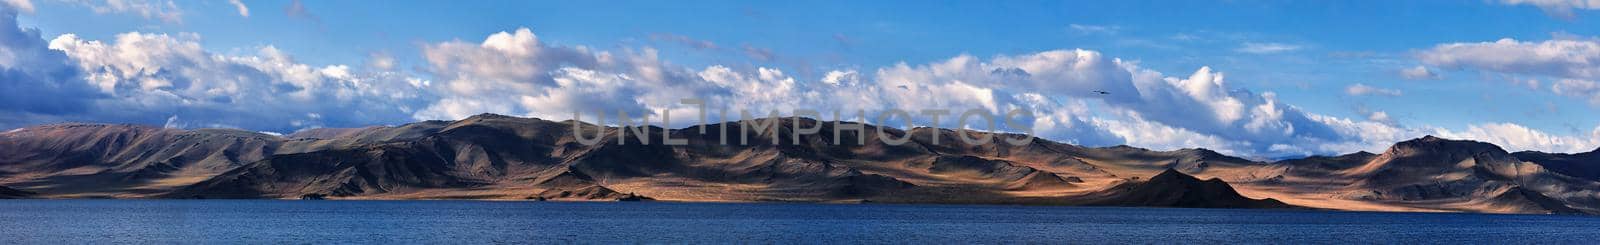 Panorama of a mountain lake. Somewhere in the vastness of Mongolia.